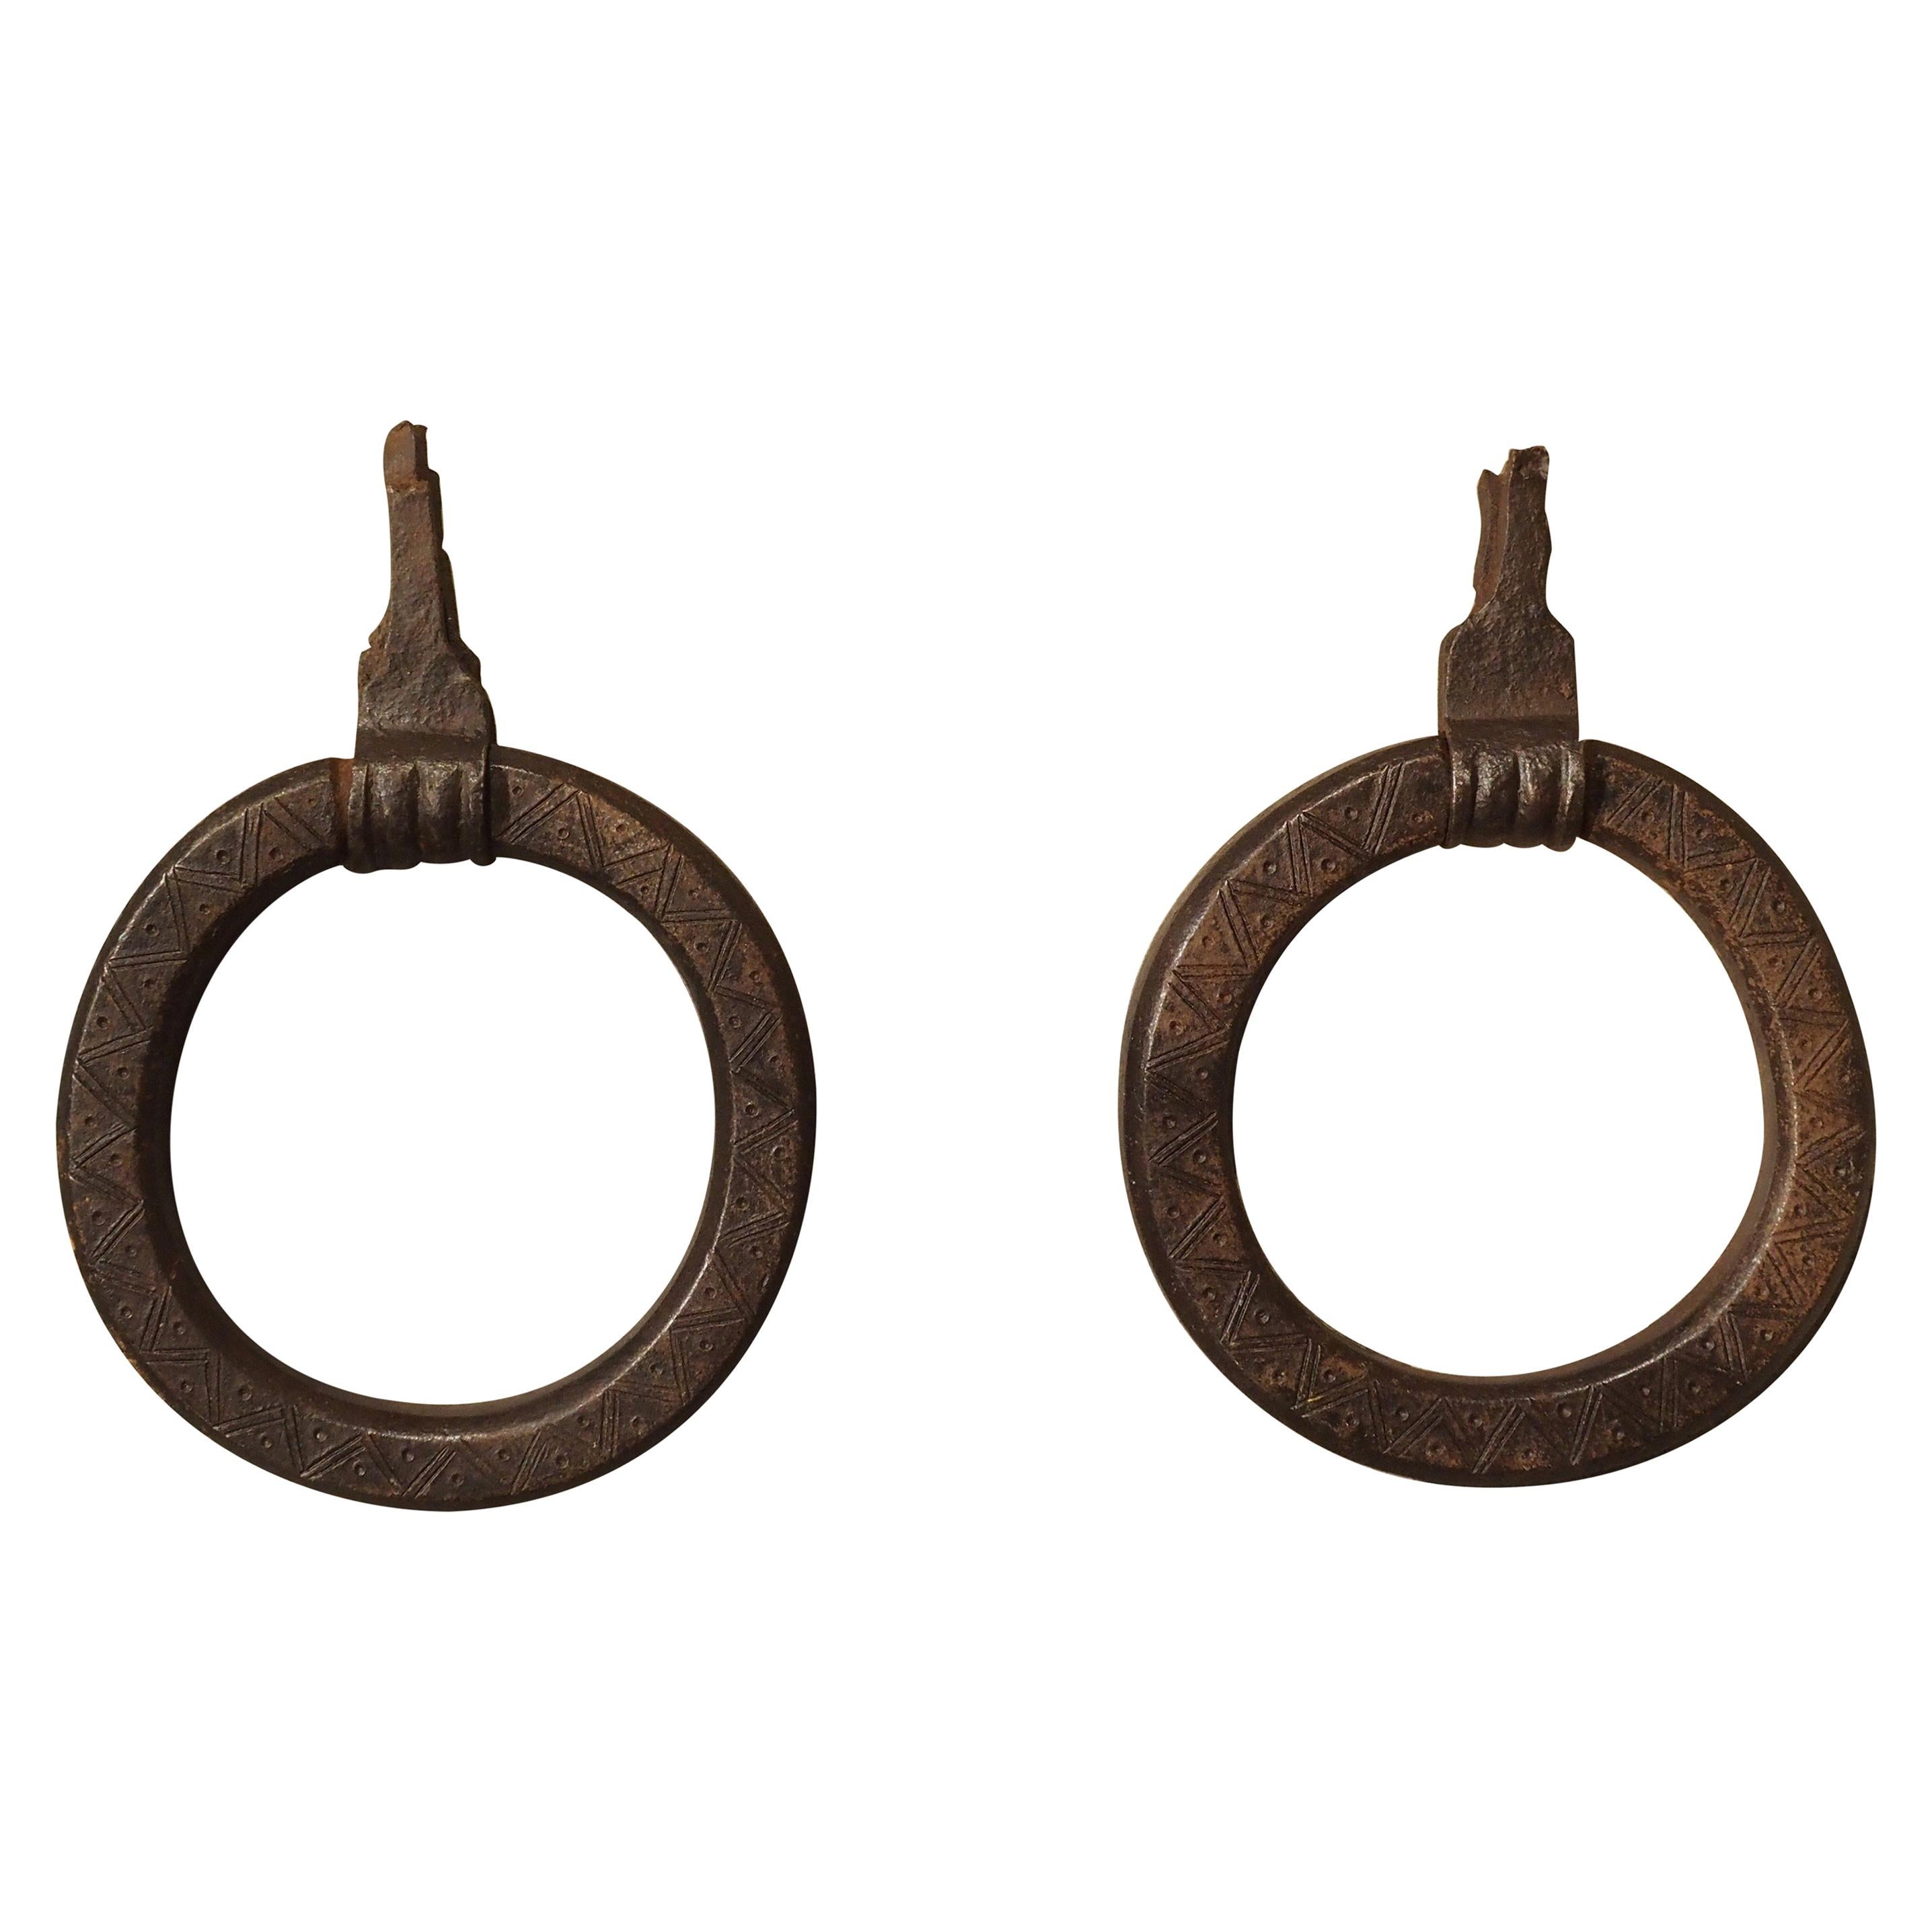 Pair of 17th Century Forged Iron Door Knockers from Tuscany